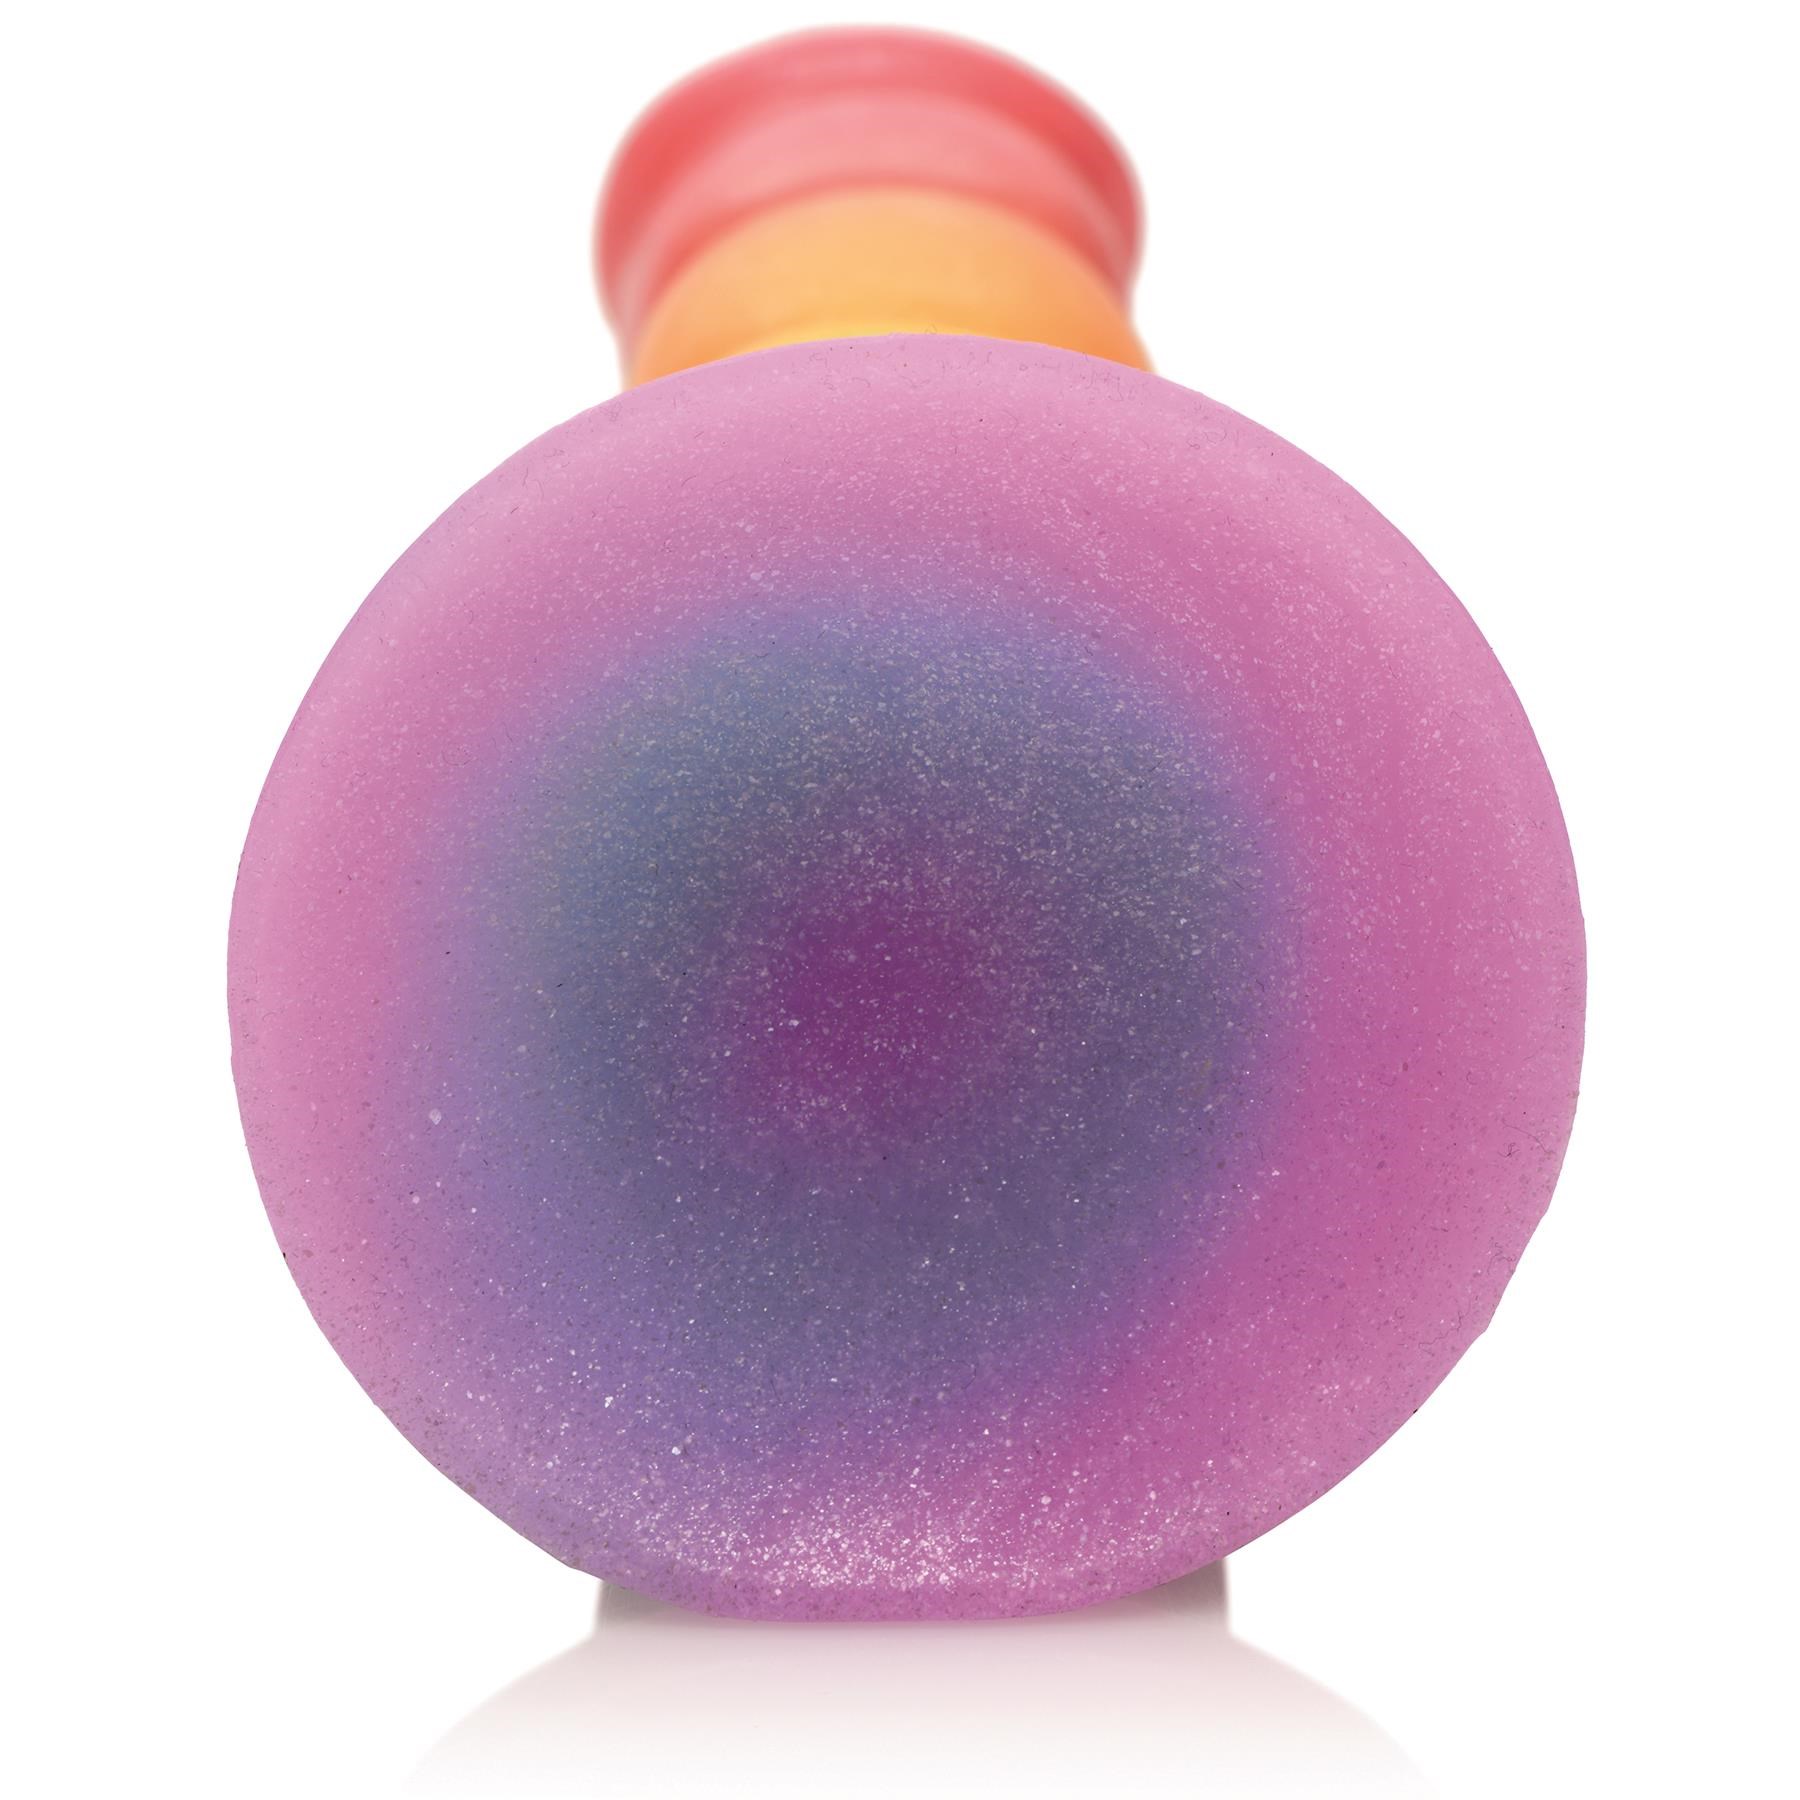 Simply Sweet Swirl Rainbow Dildo - Product Shot #5 - Showing Suction Cup